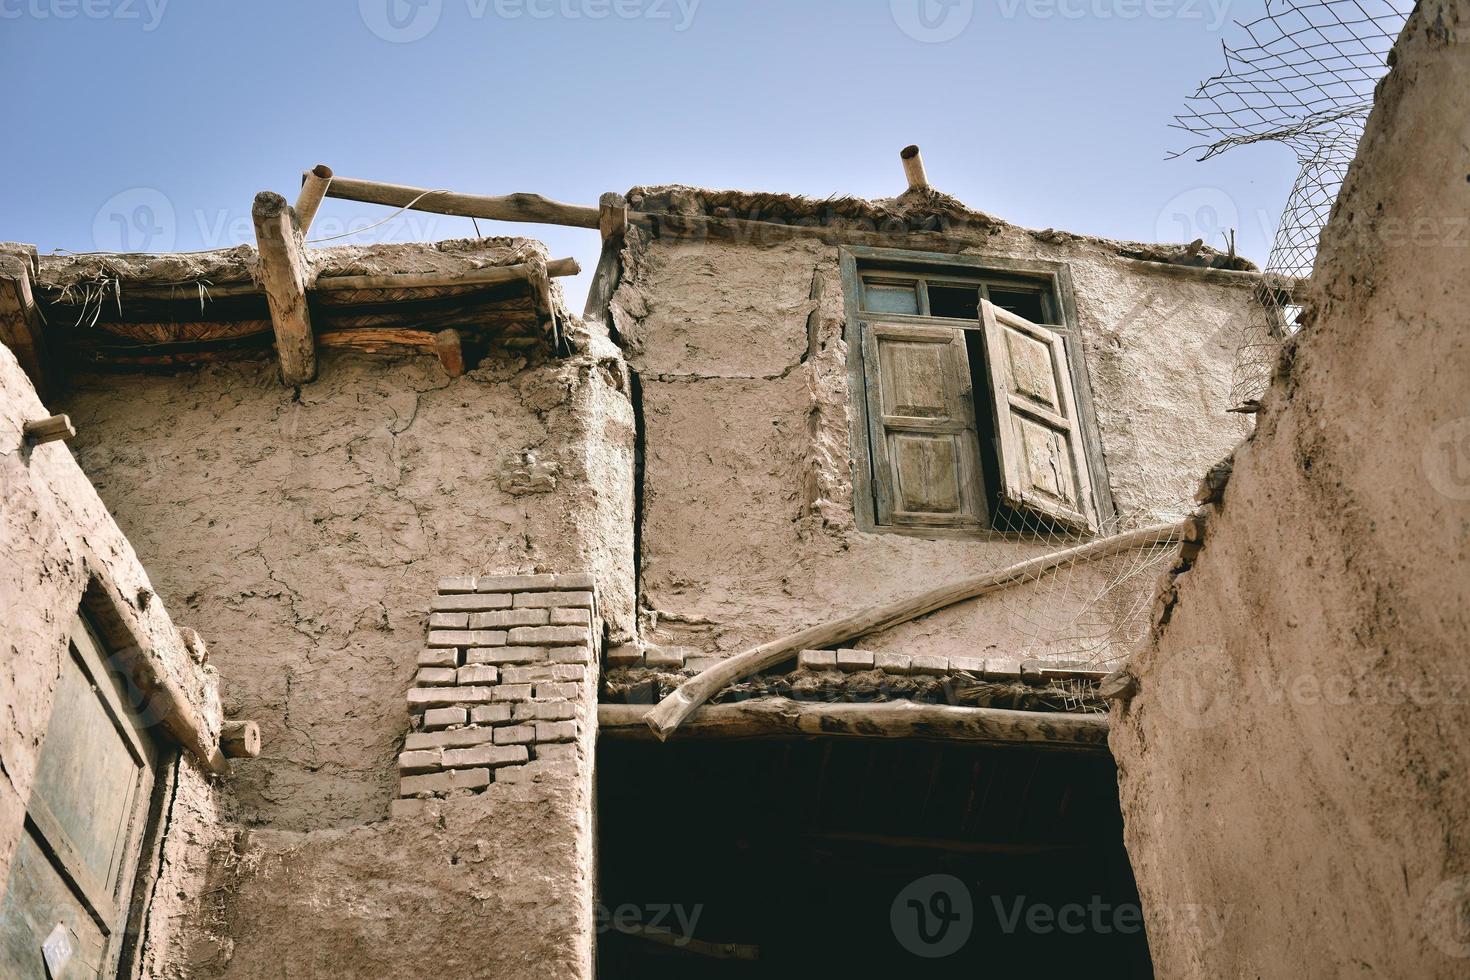 The dilapidated and long-standing Folk Houses on Hathpace in Kashgar, Xinjiang photo